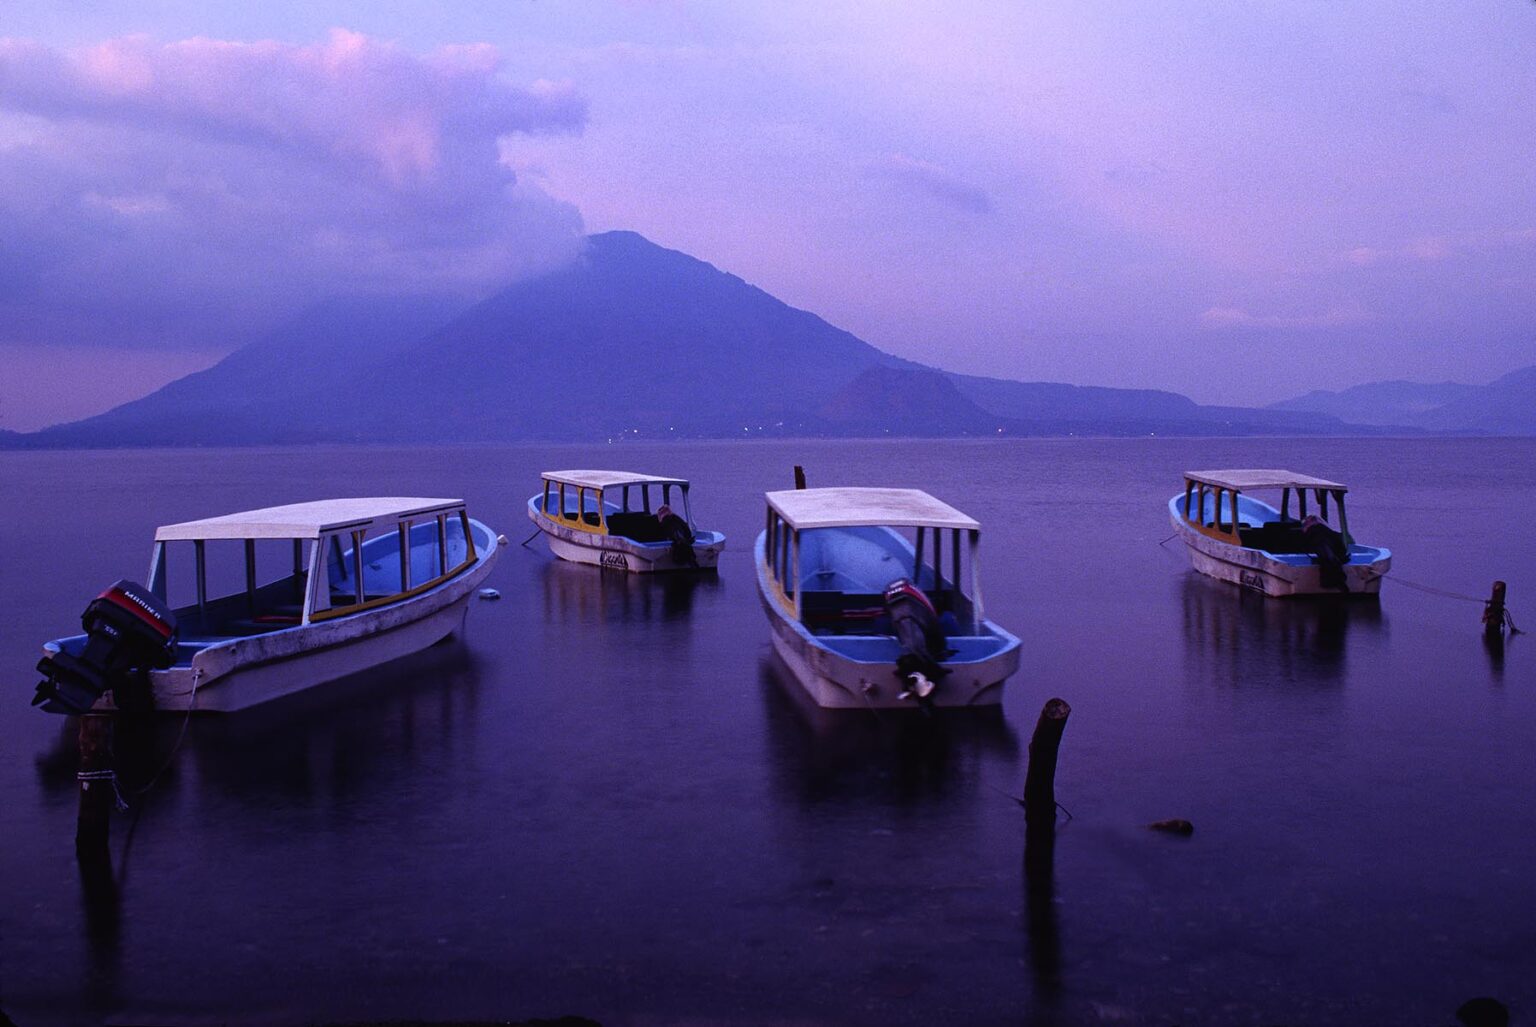 Colorful BOATS docked in PANAJACHEL with VOLCANOS in the distance - LAKE ATITLAN, GUATEMALA